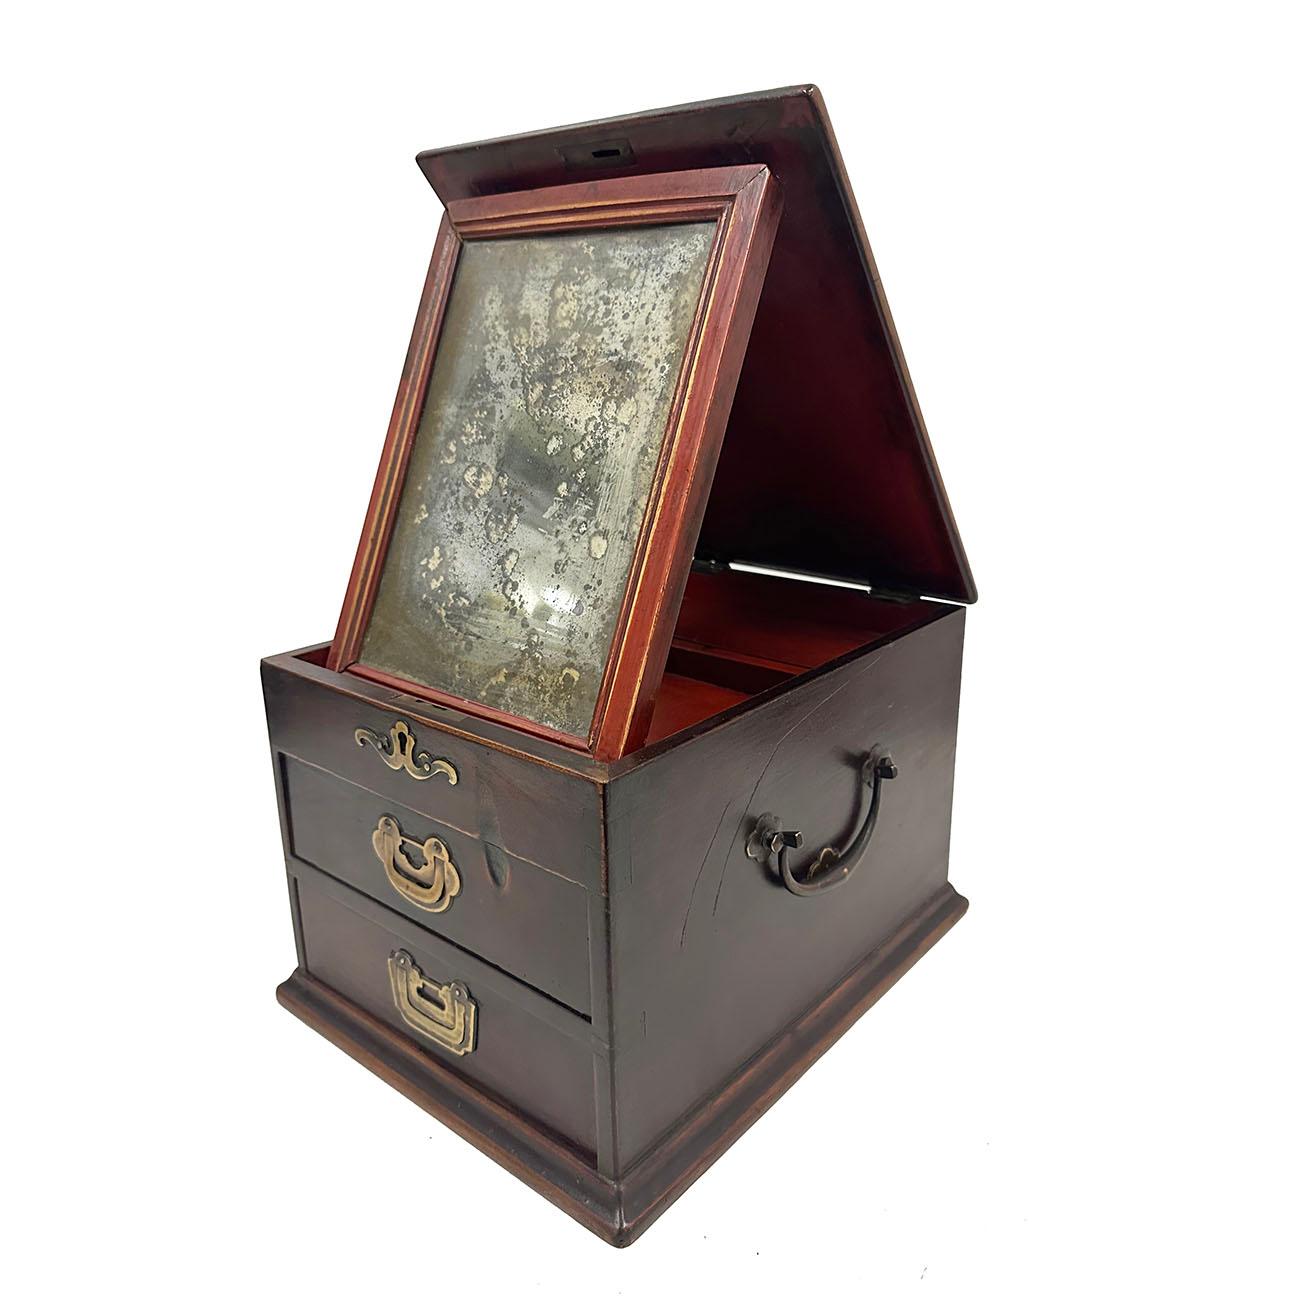 This beautiful antique Jewelry box was made from solid wood with original mirror and antique hardware on it. The top of the jewelry box can be lift open and has a mirror stand attached on it and can be used as a cosmetic box. Underneath the mirror